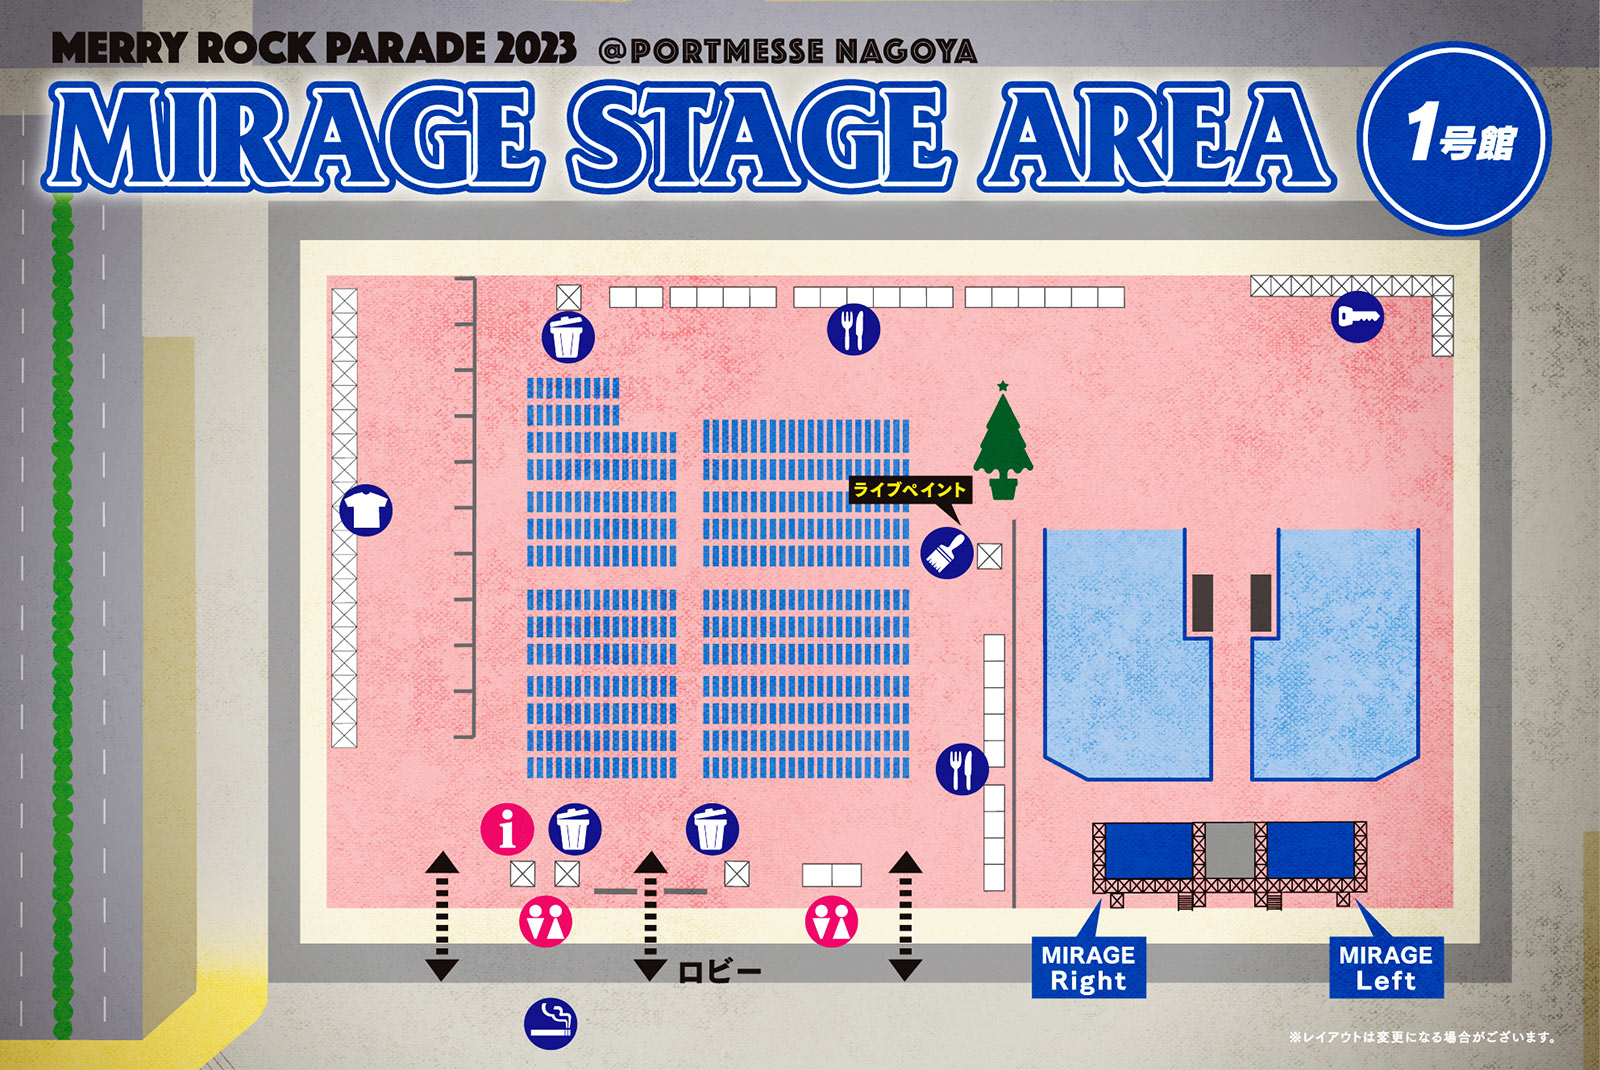 MIRAGE STAGE AREA